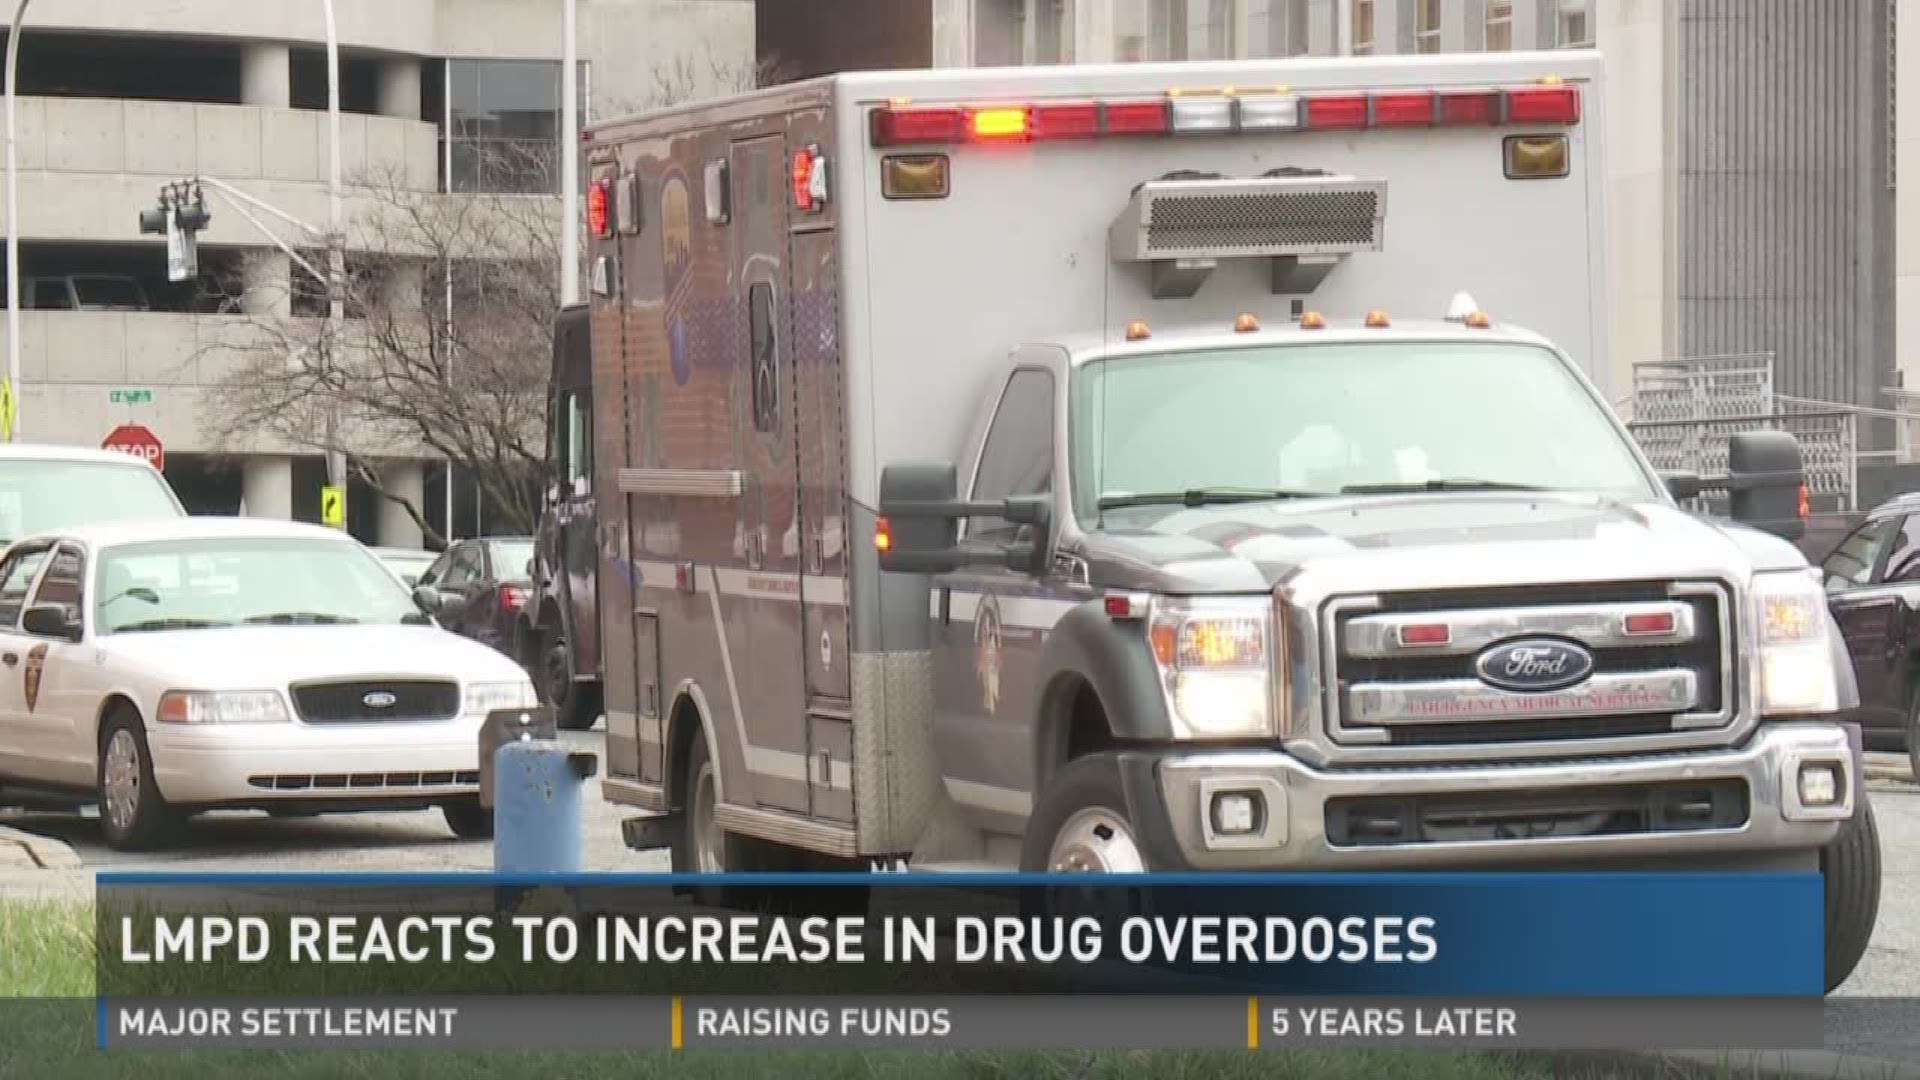 LMPD reacts to increase in drug overdose